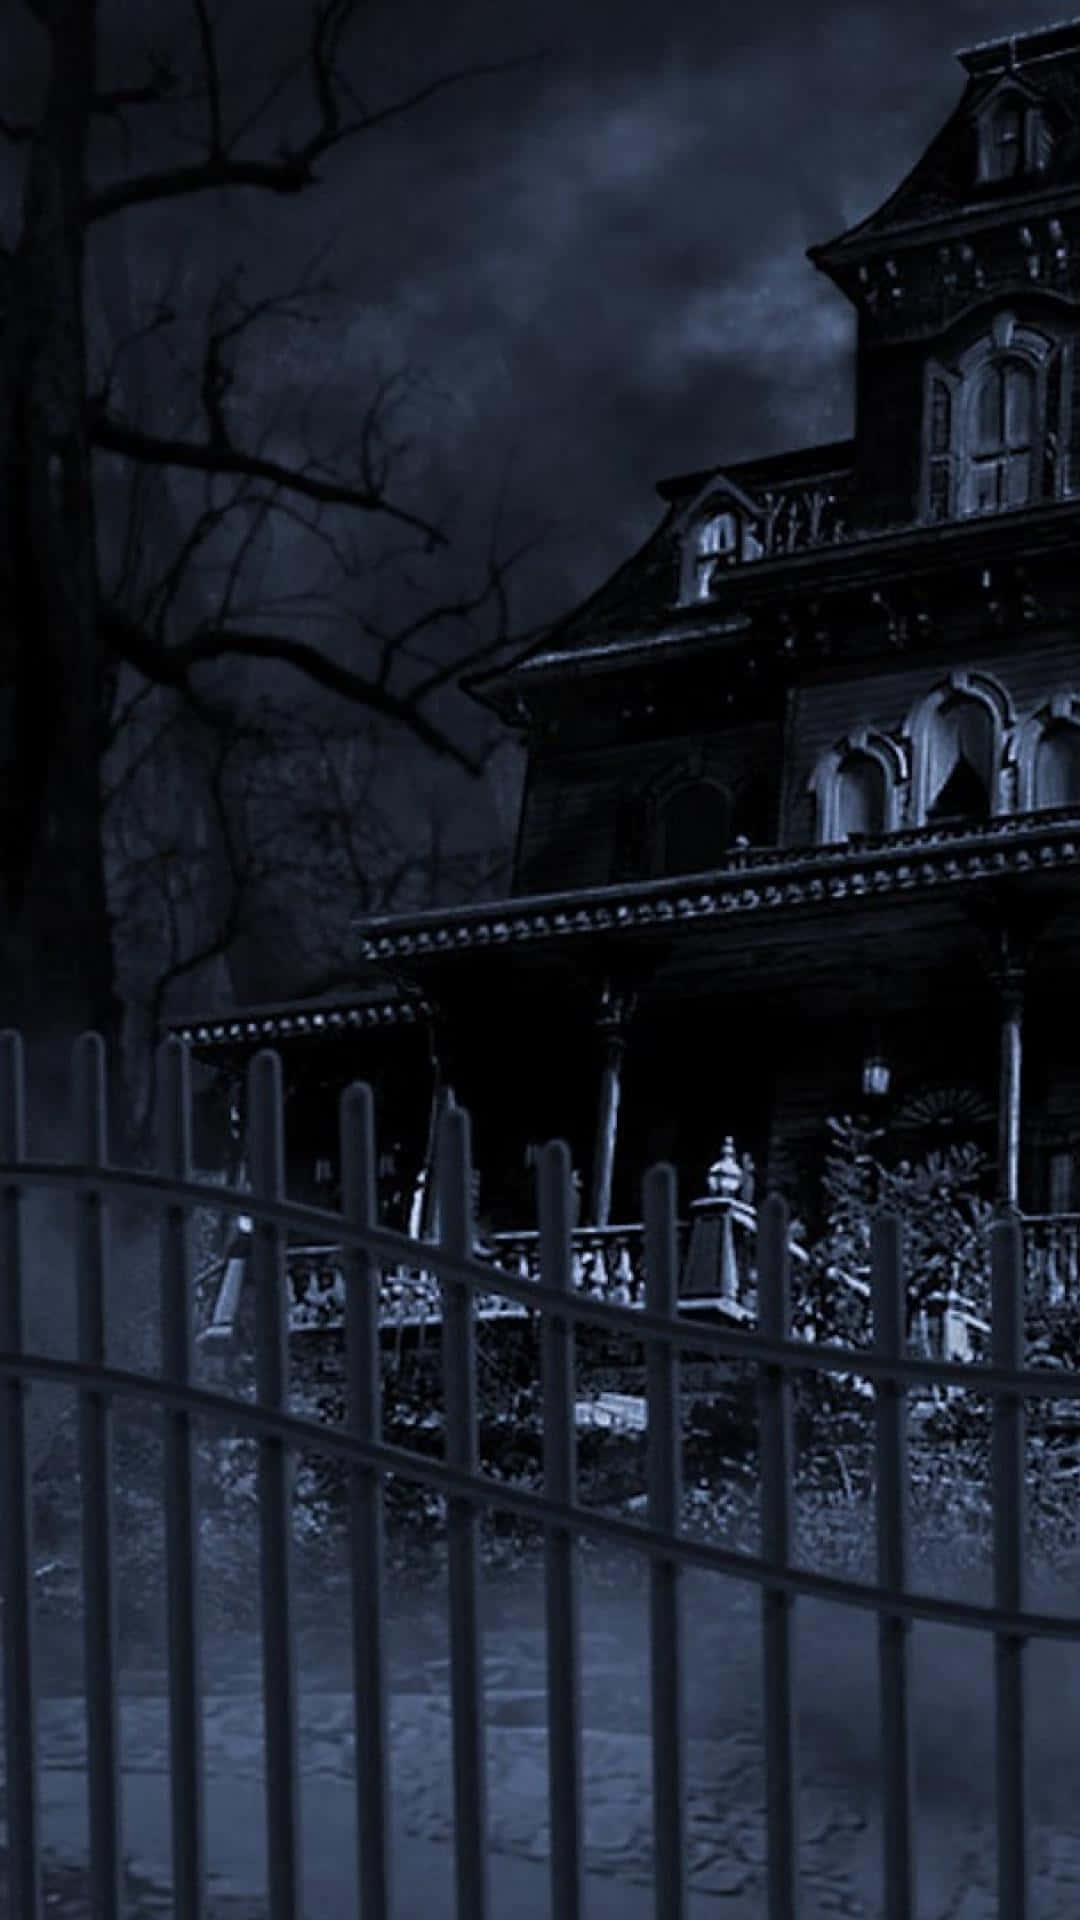 Dare to explore the hidden mysteries of this haunted house.